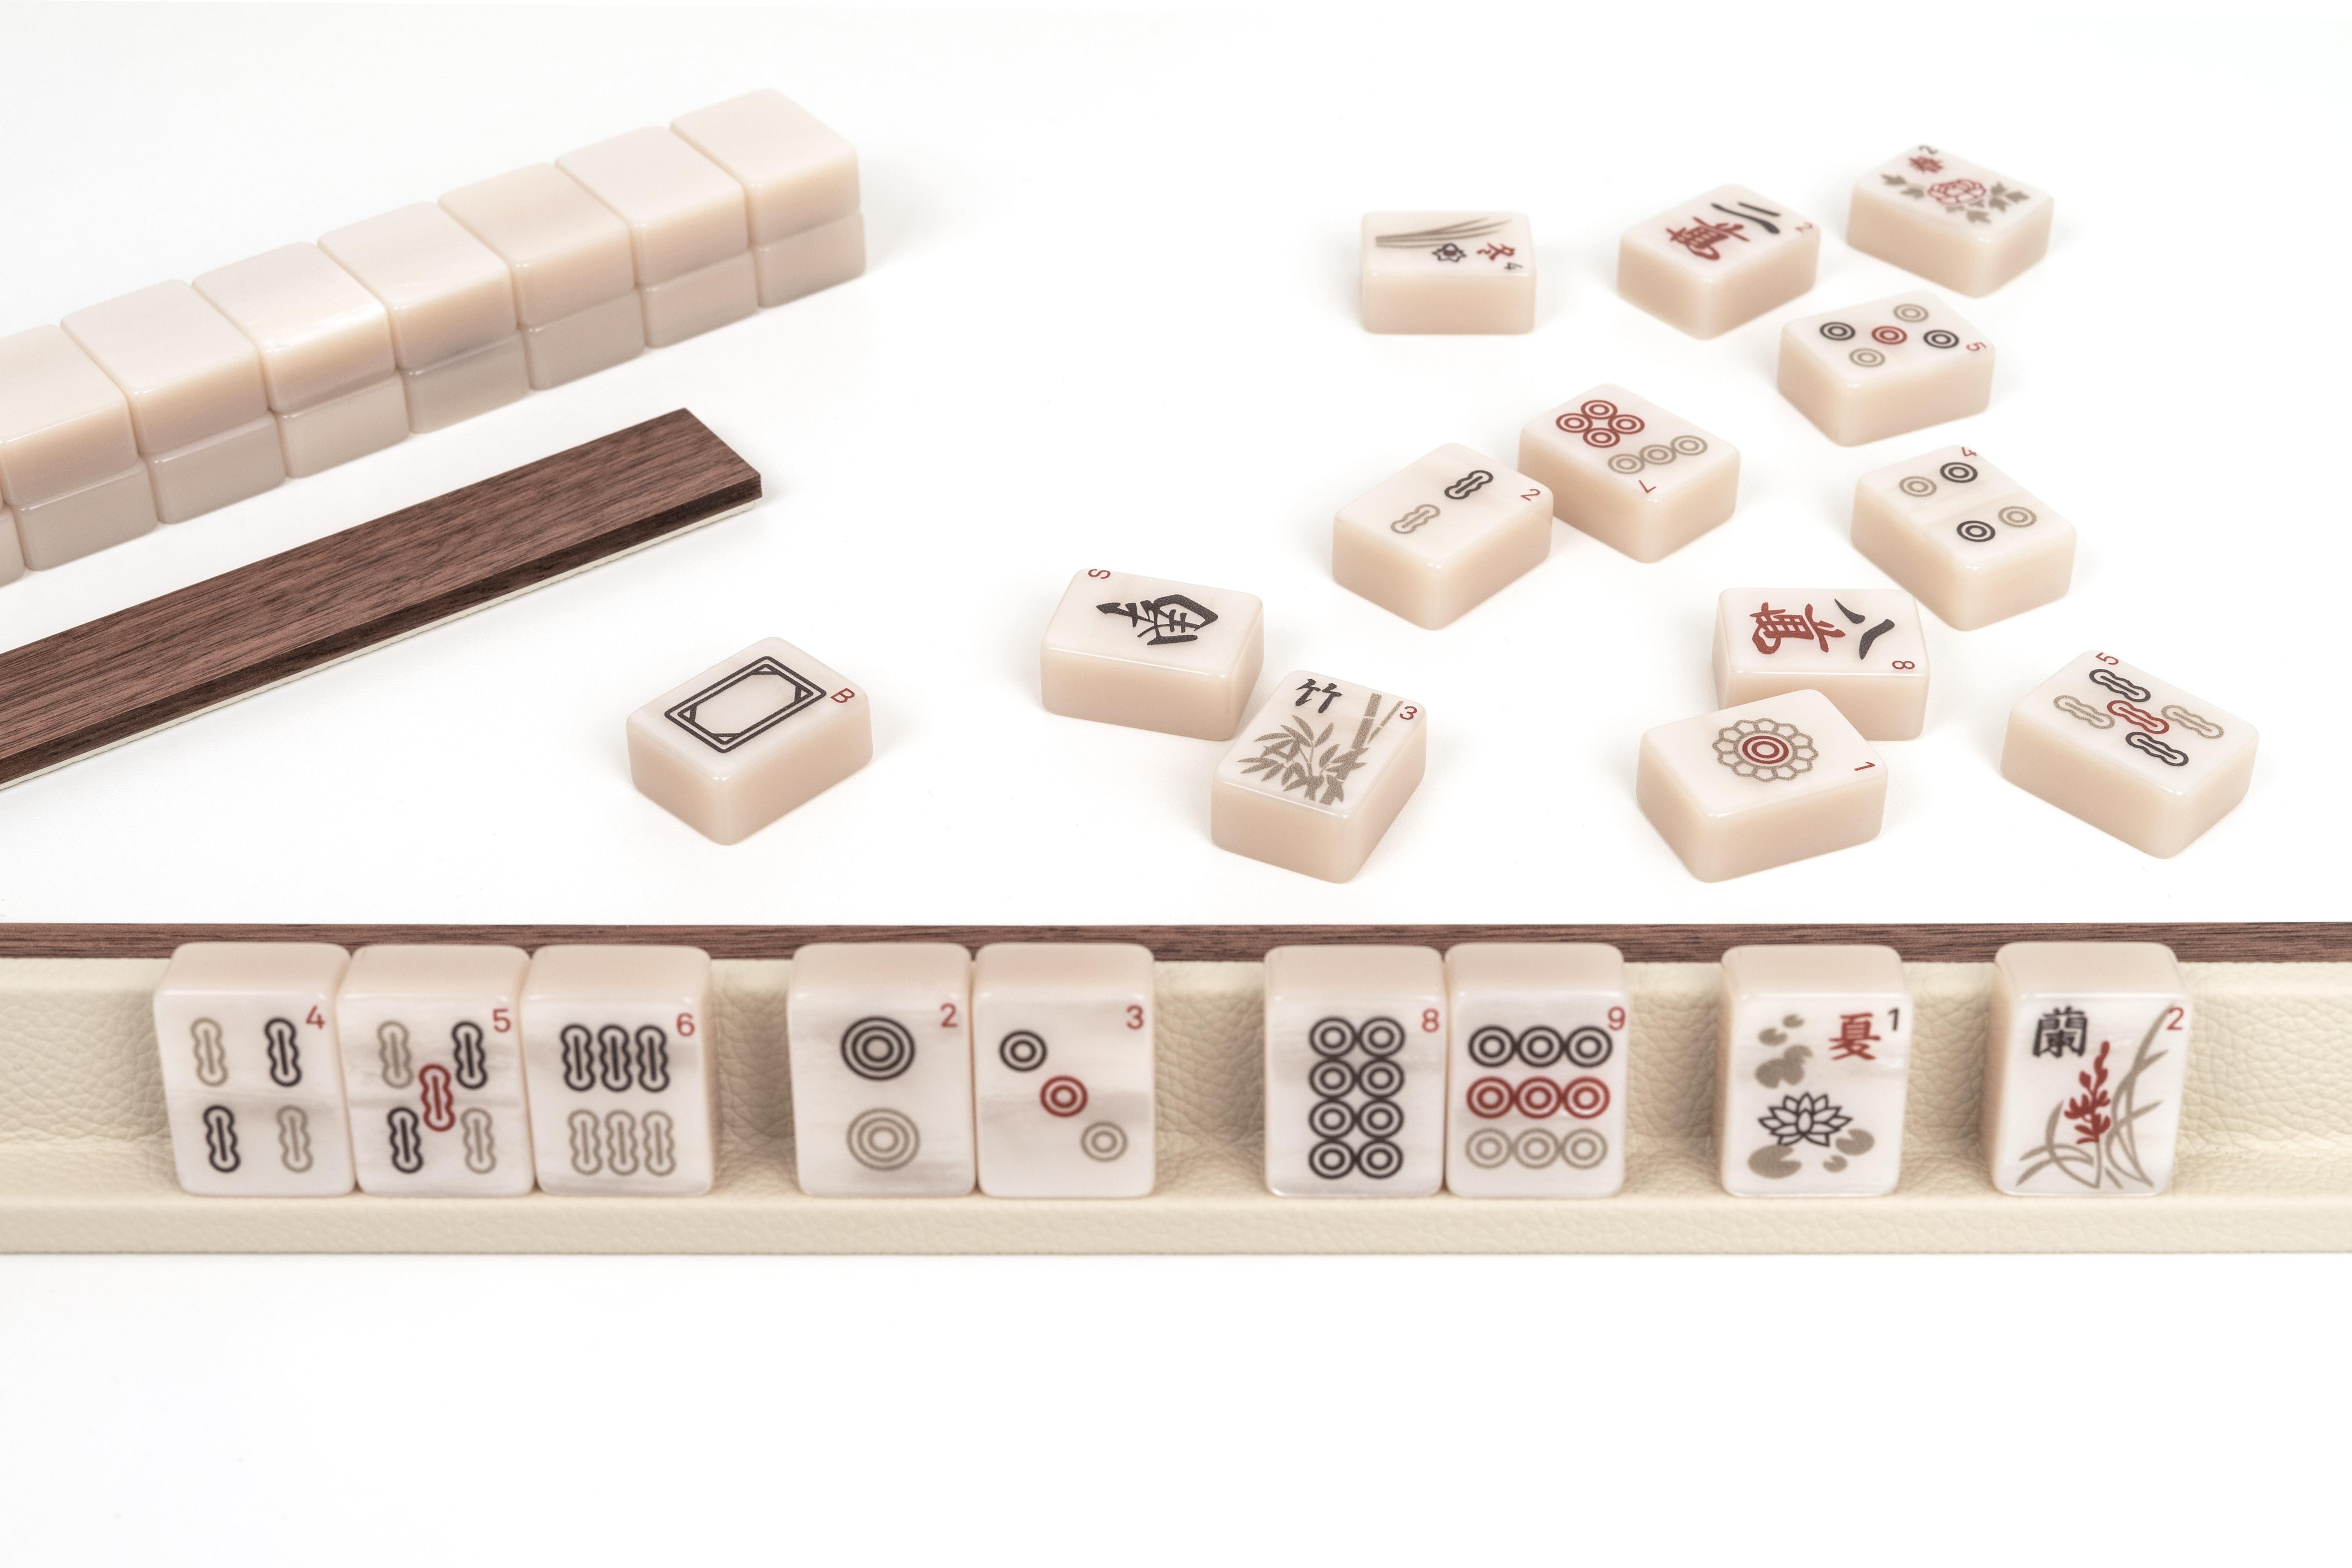 Hand-Crafted 21st Mahjong Game Set in Walnut Wood and Leather Handmade in Italy For Sale